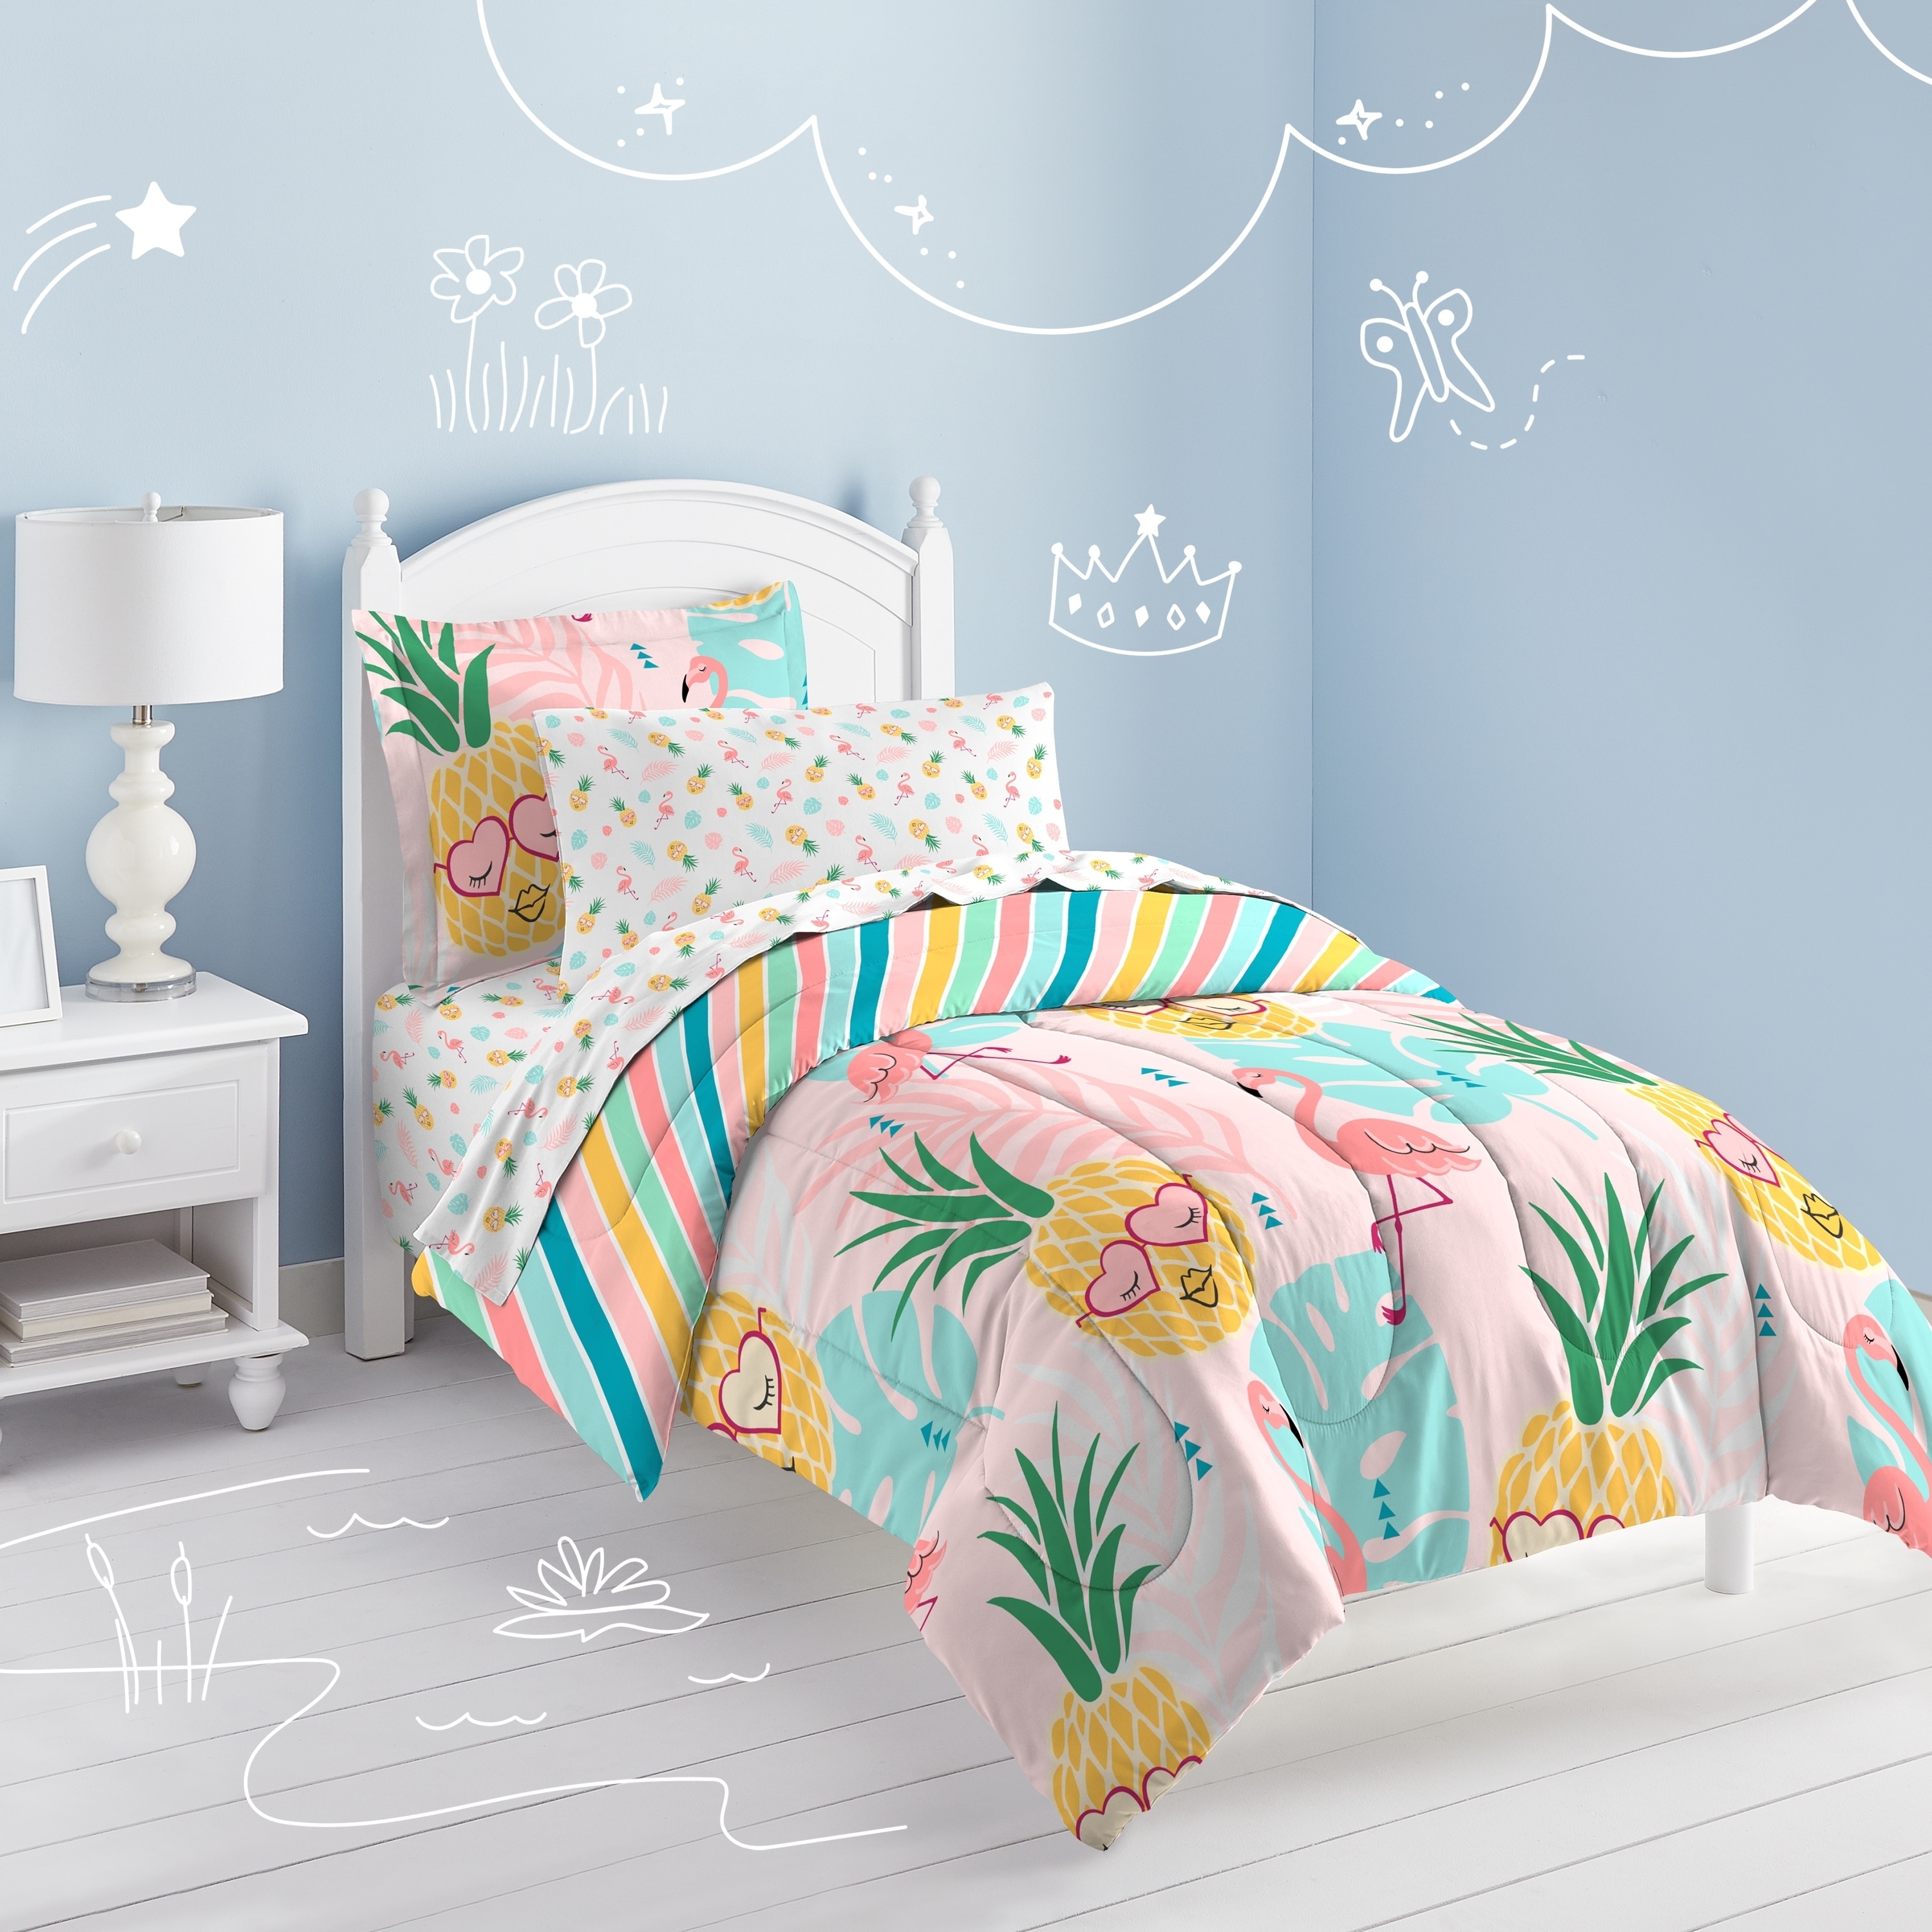 https://ak1.ostkcdn.com/images/products/27126290/Dream-Factory-Pineapple-7-Piece-Bed-in-a-Bag-with-Sheet-Set-2c2a7e34-5a4f-42e9-83d8-c08a041cb12d.jpg